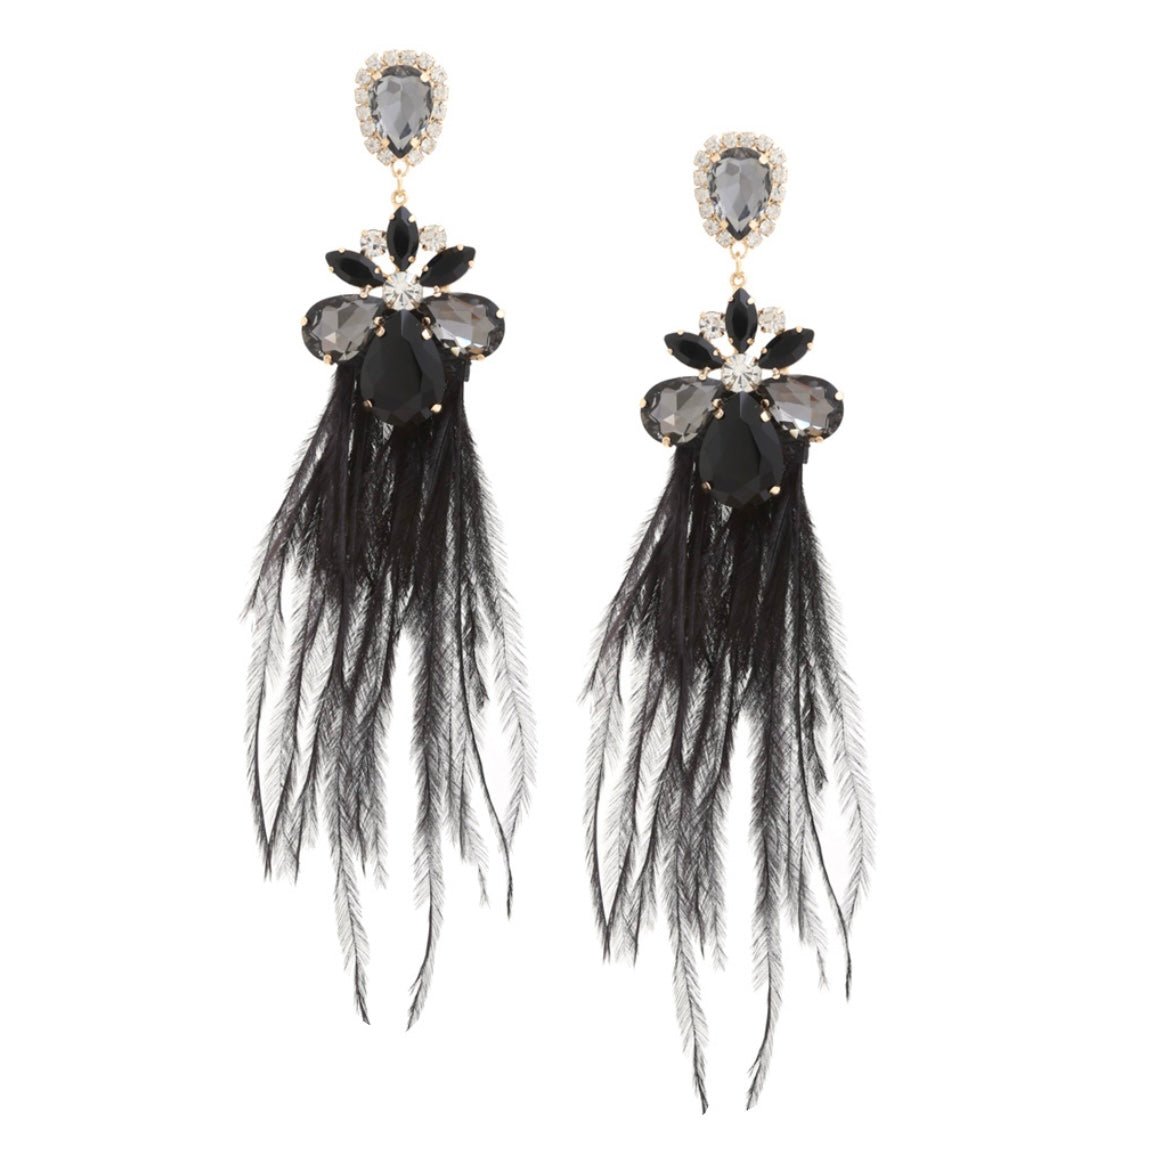 Light As A Feather Crystal Statement Earrings In Black